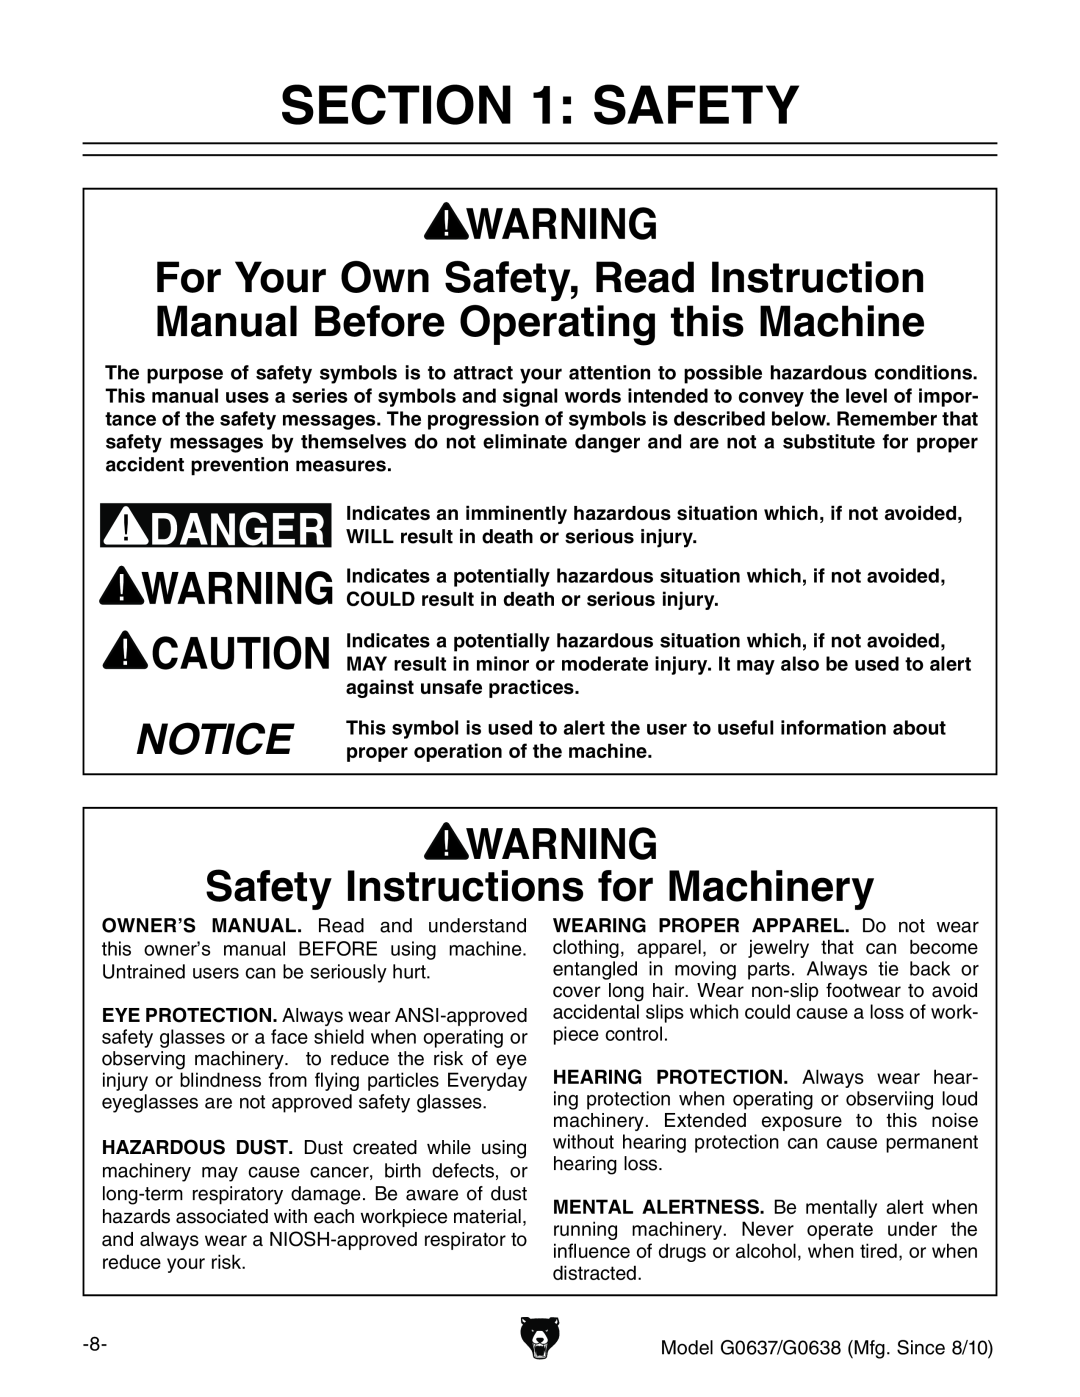 Grizzly G0637 owner manual Notice, Safety Instructions for Machinery 